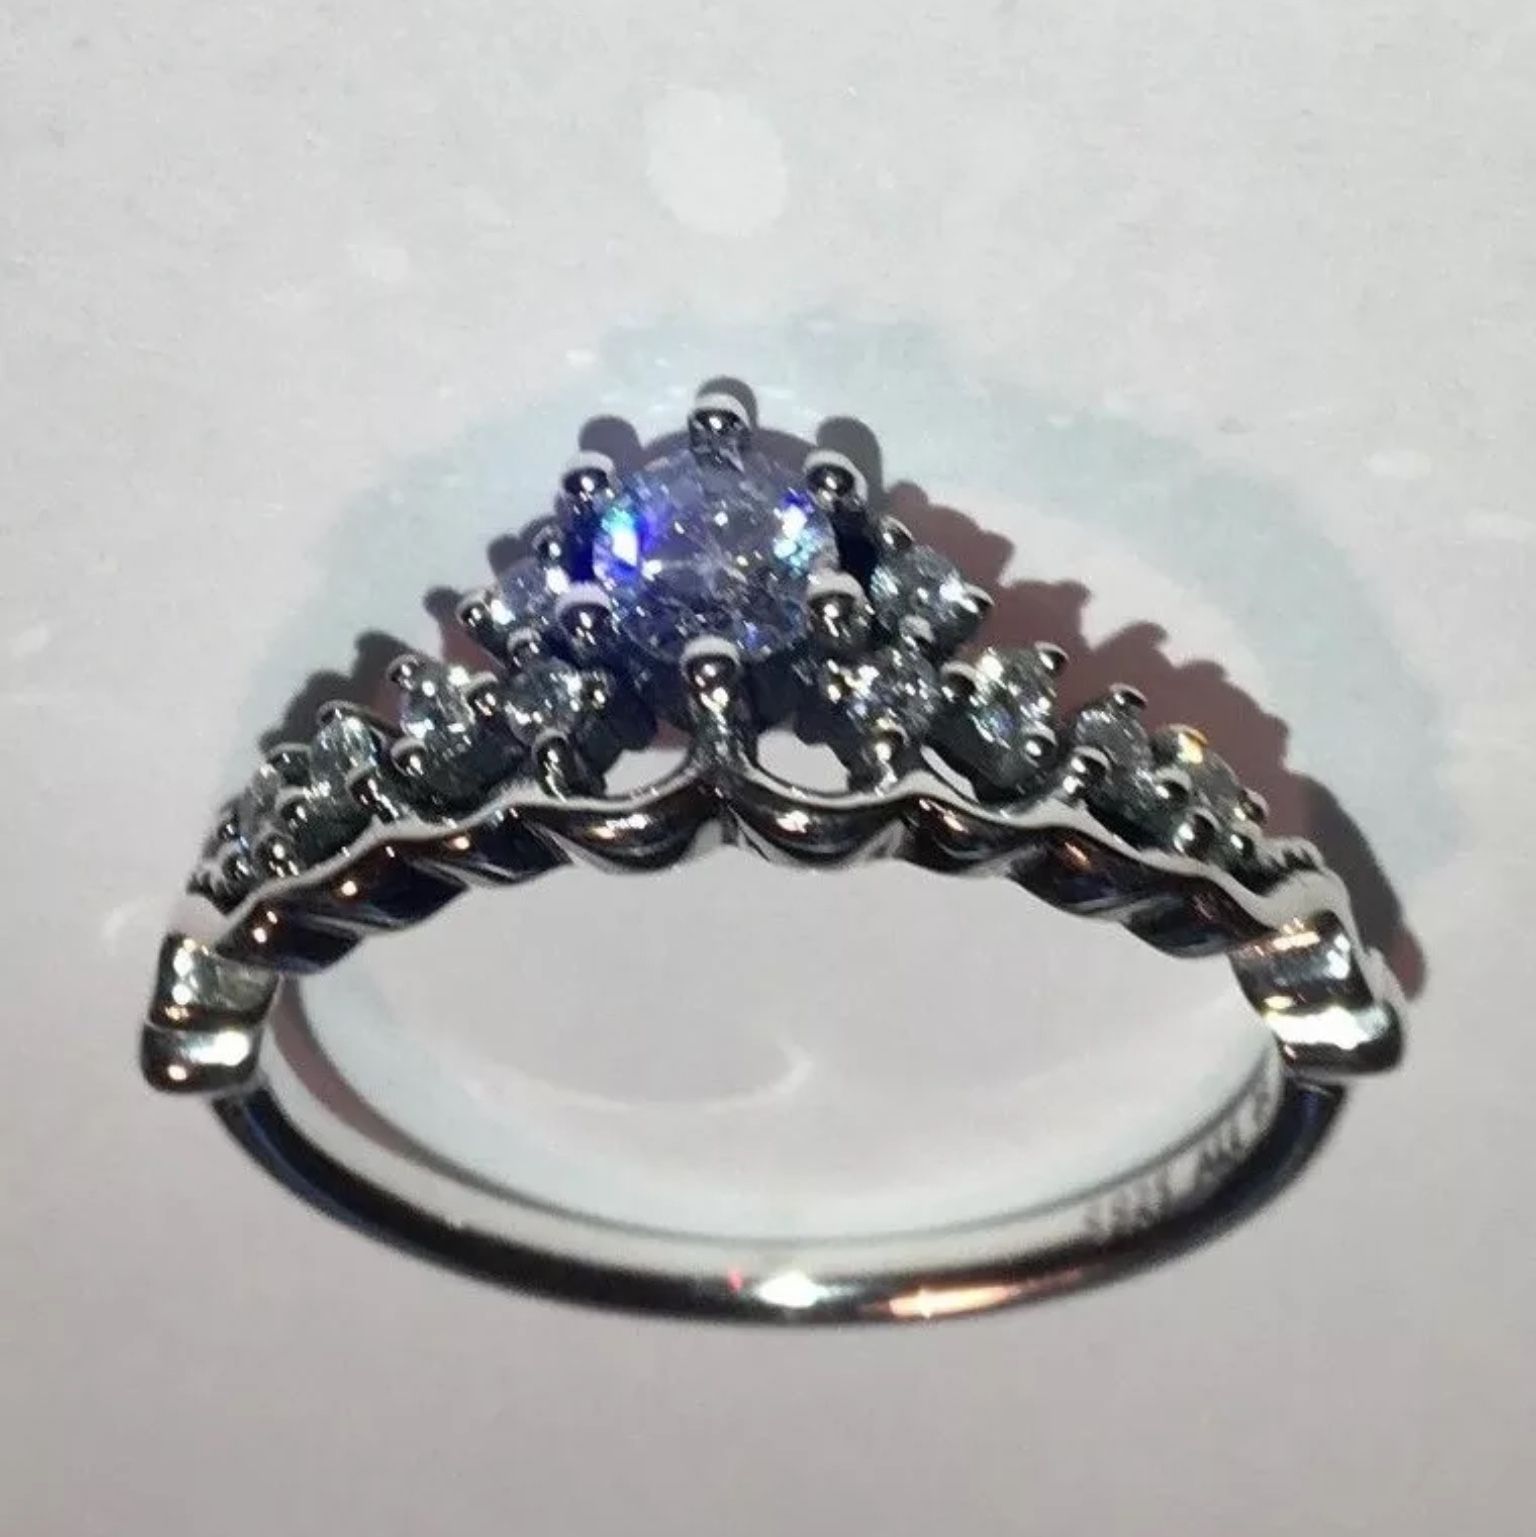 Pandora Fairytale Tiara Ring ☄️authentic ☄️amazing – Depop Intended For Most Up To Date Fairytale Tiara Rings (View 25 of 25)